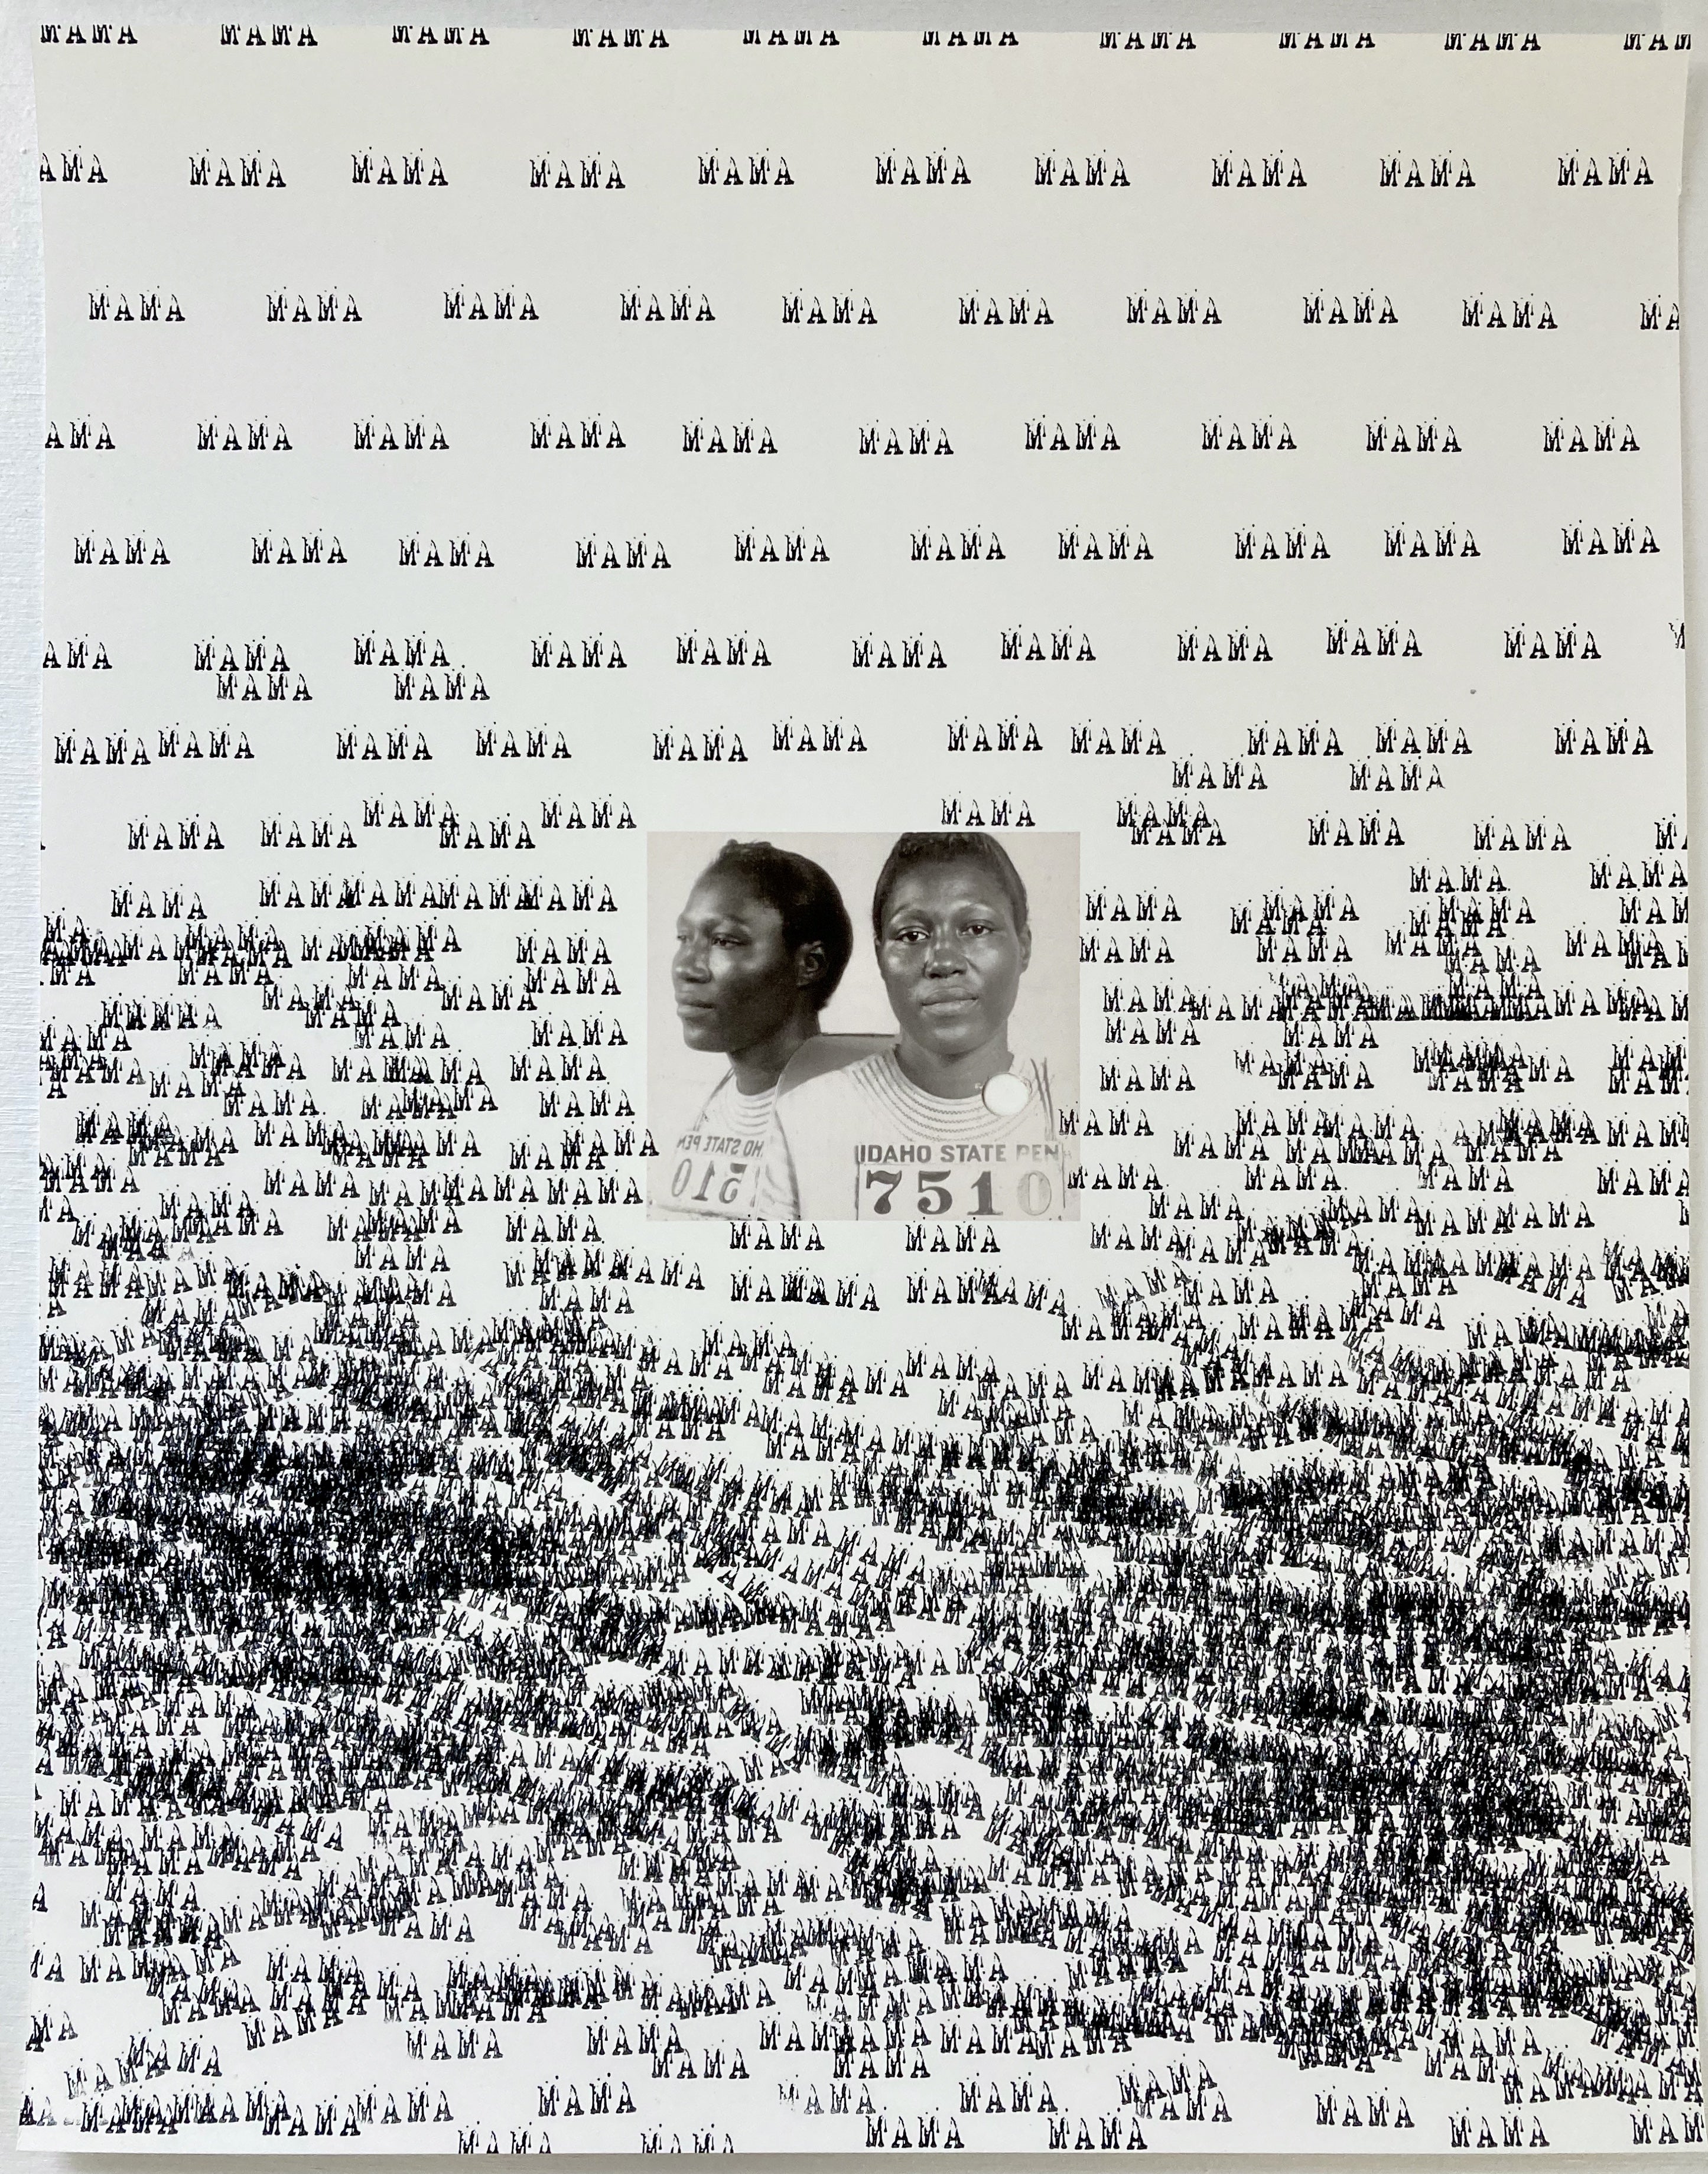 Two portraits of black men surrounded by text